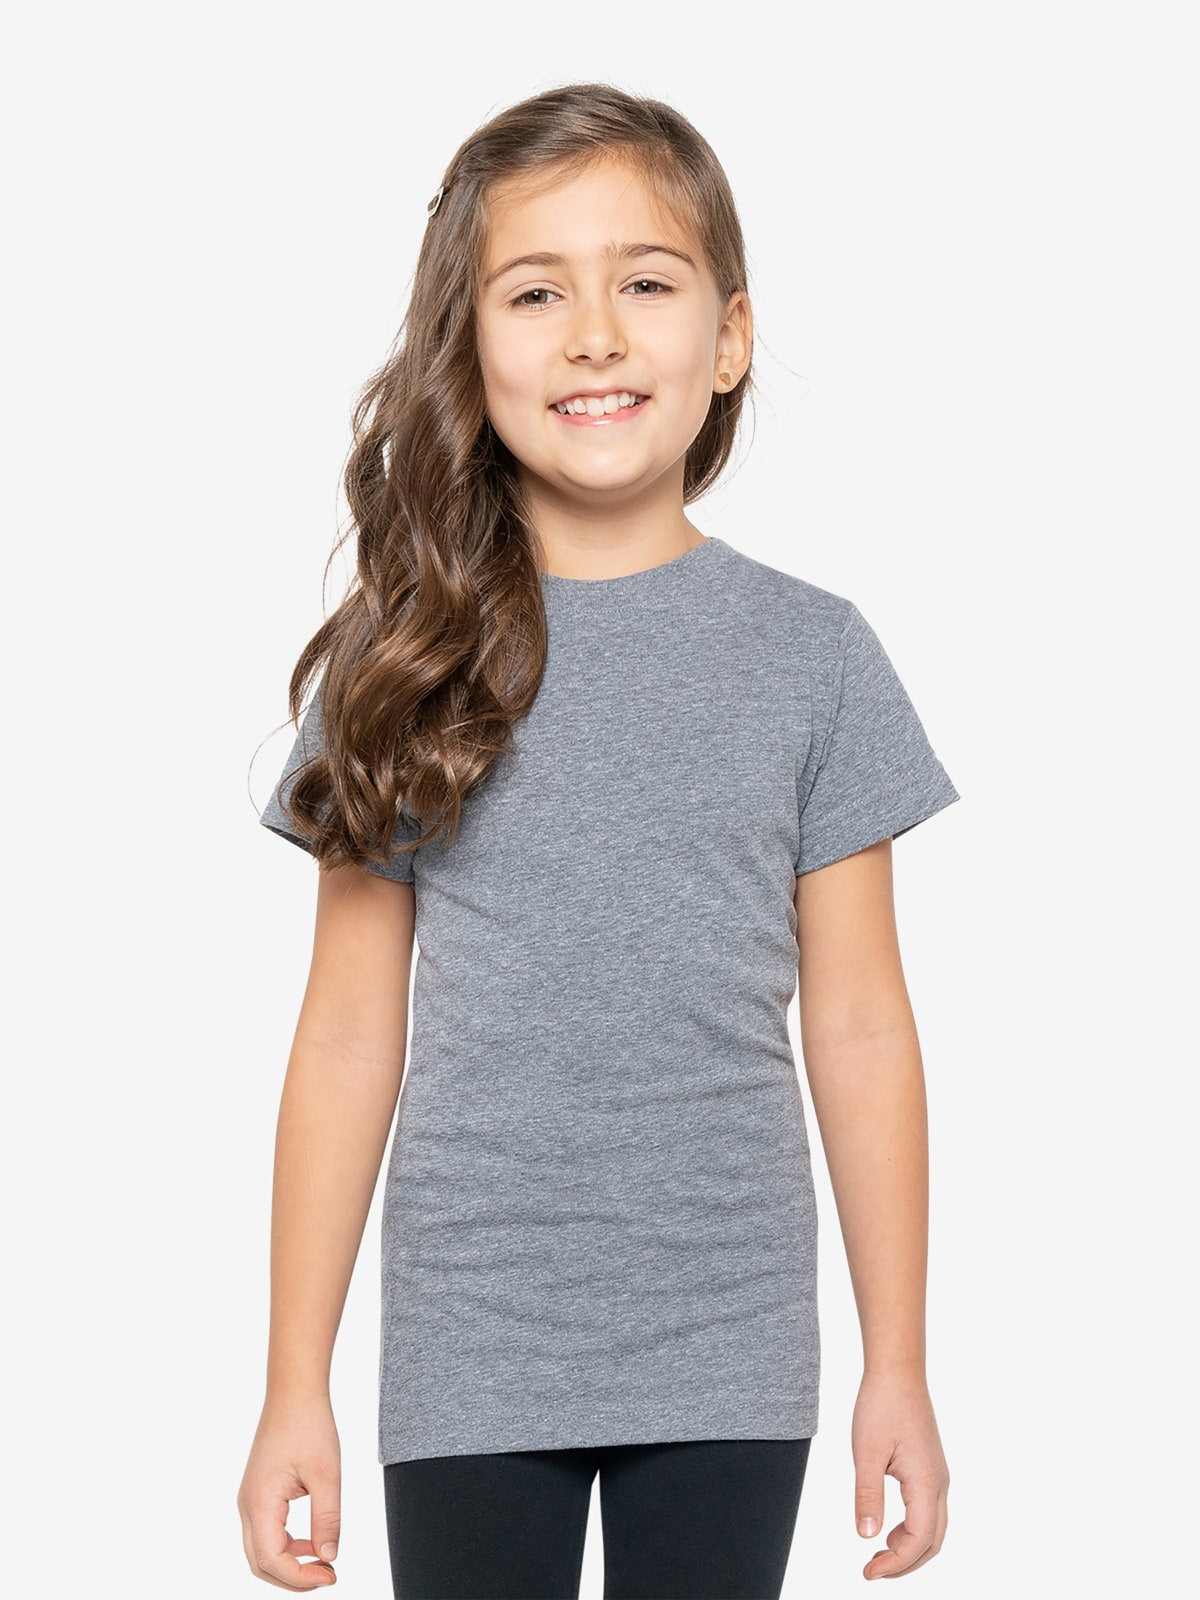 Girls' Insect Repellent Short Sleeve Slim Fit T-Shirt – Insect Shield